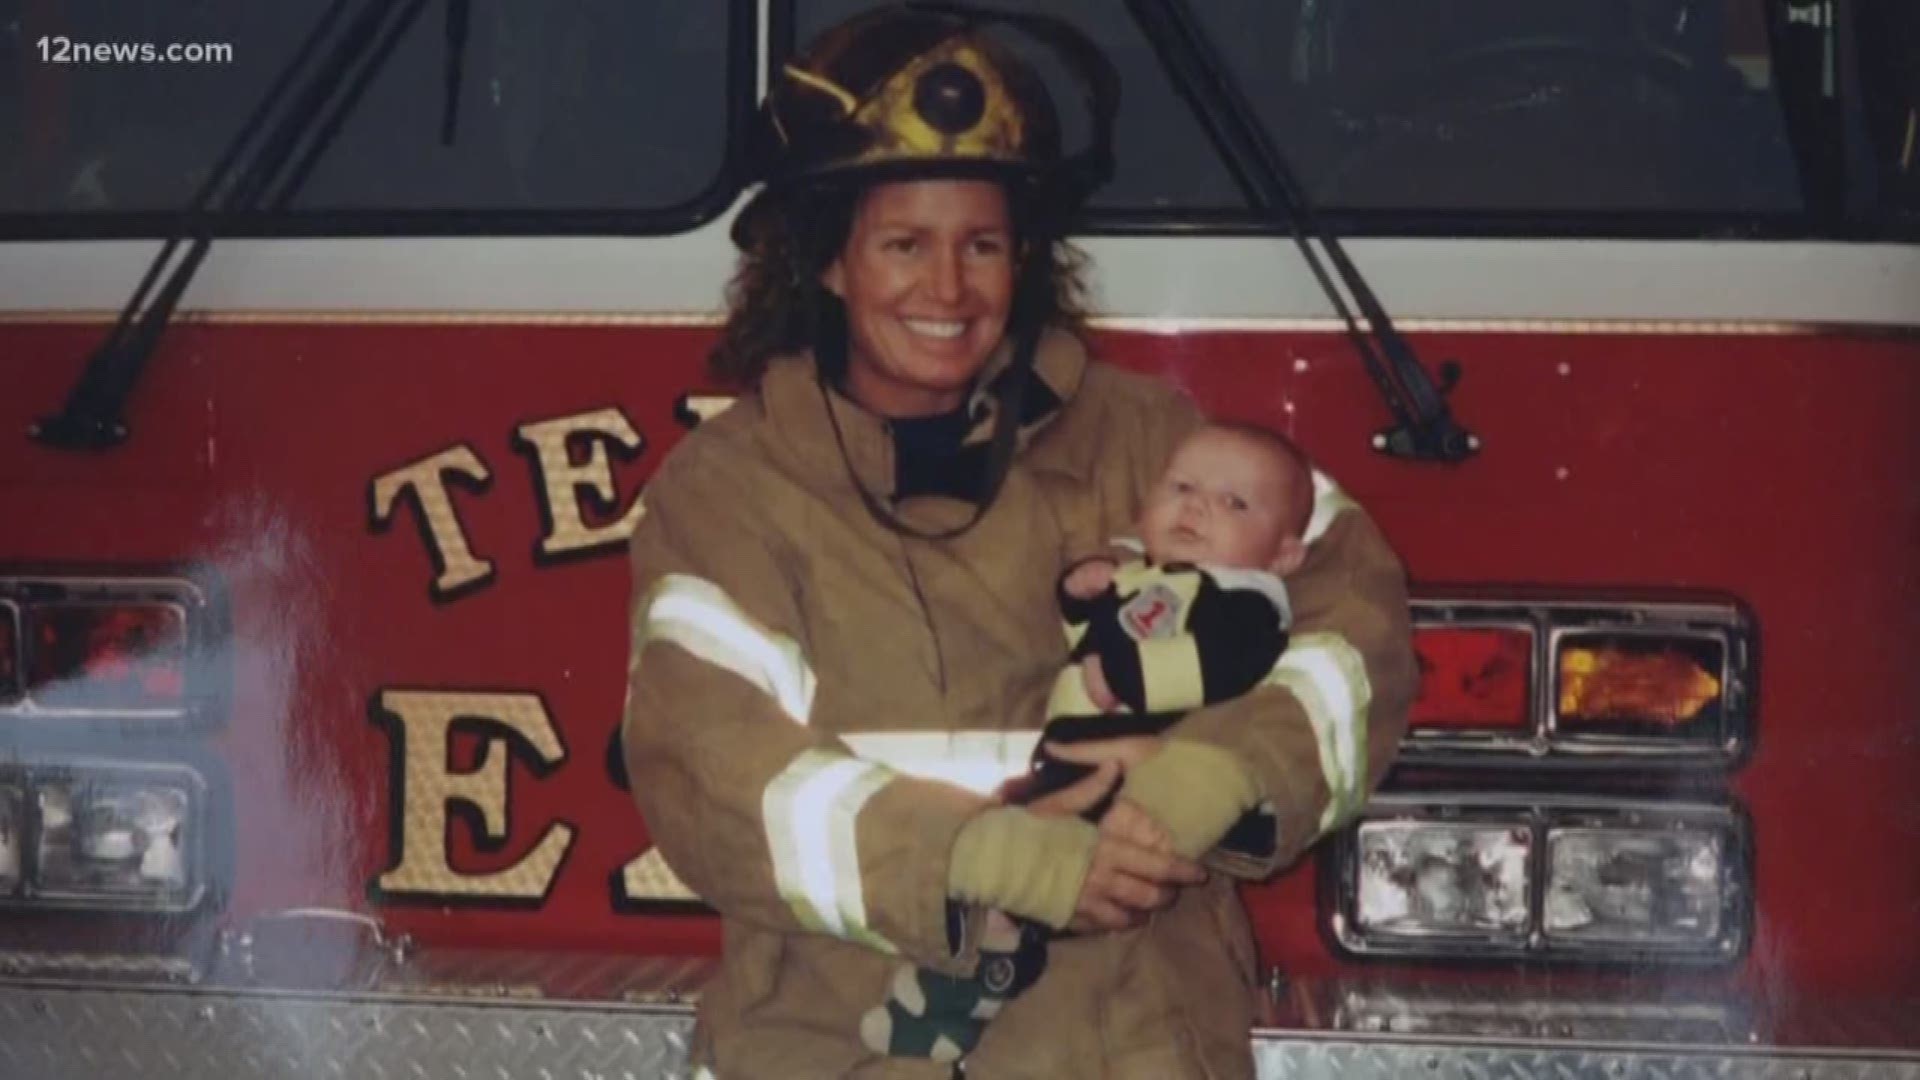 Gretchen Chalmers, the first female to retire from Tempe Fire, spent 26 years with the department and says she's ready to spend more time with her husband. But she says, she's excited for girls of the future to take up any job they want just like she did.